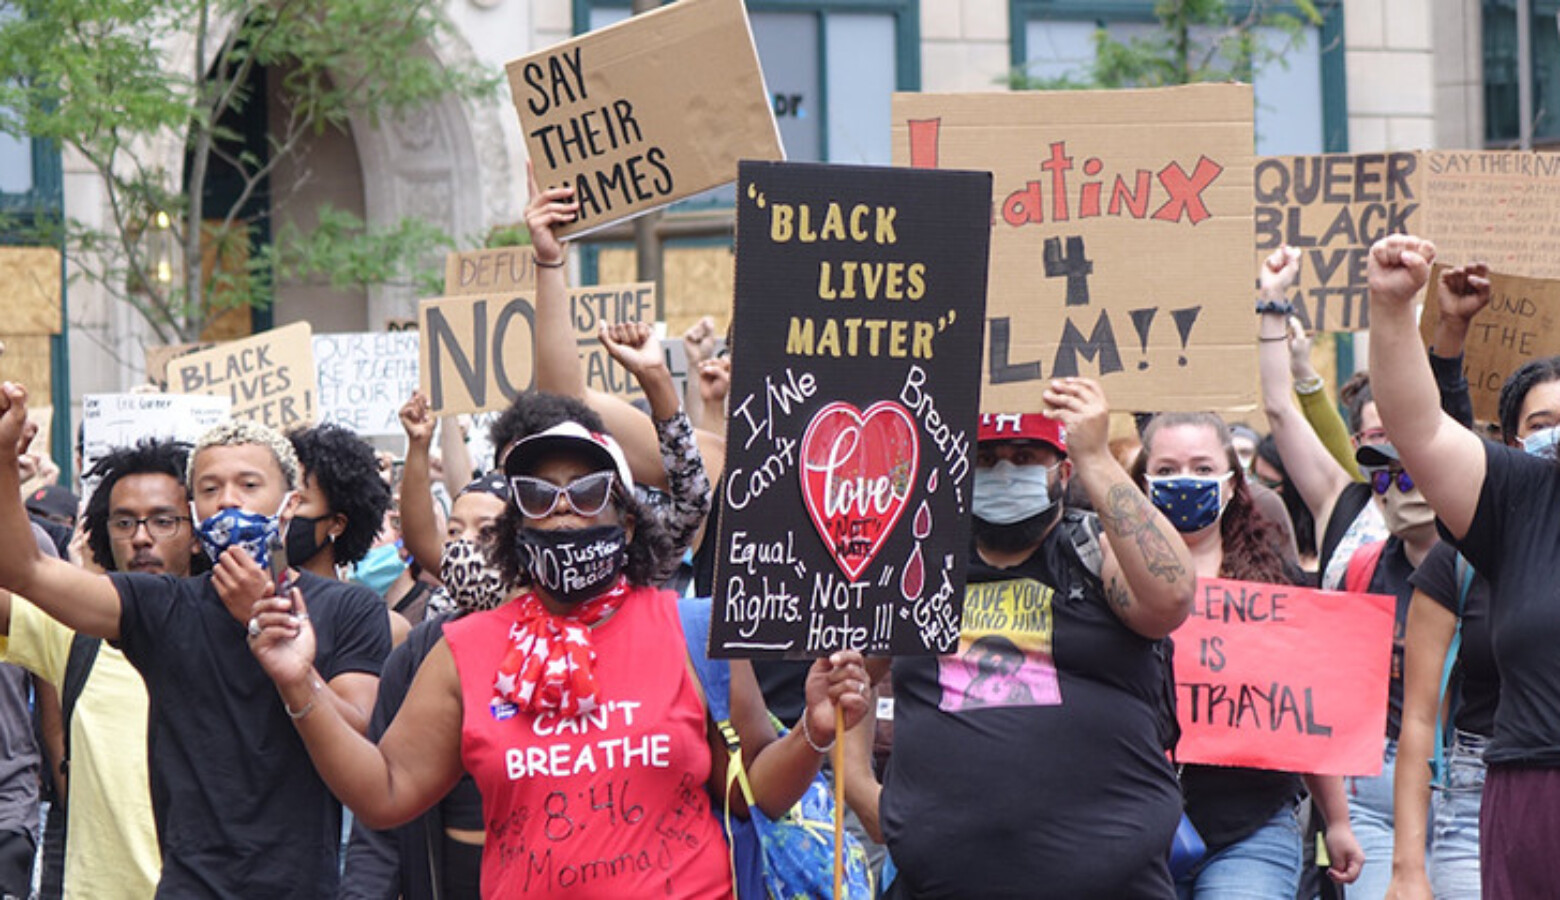 A rally organized by the Indiana Racial Justice Alliance drew several hundred people to Monument Circle on Saturday, June 13, 2020. The group wants the city to reduce the budget of IMPD and reinvest the funds in new community-led initiatives.